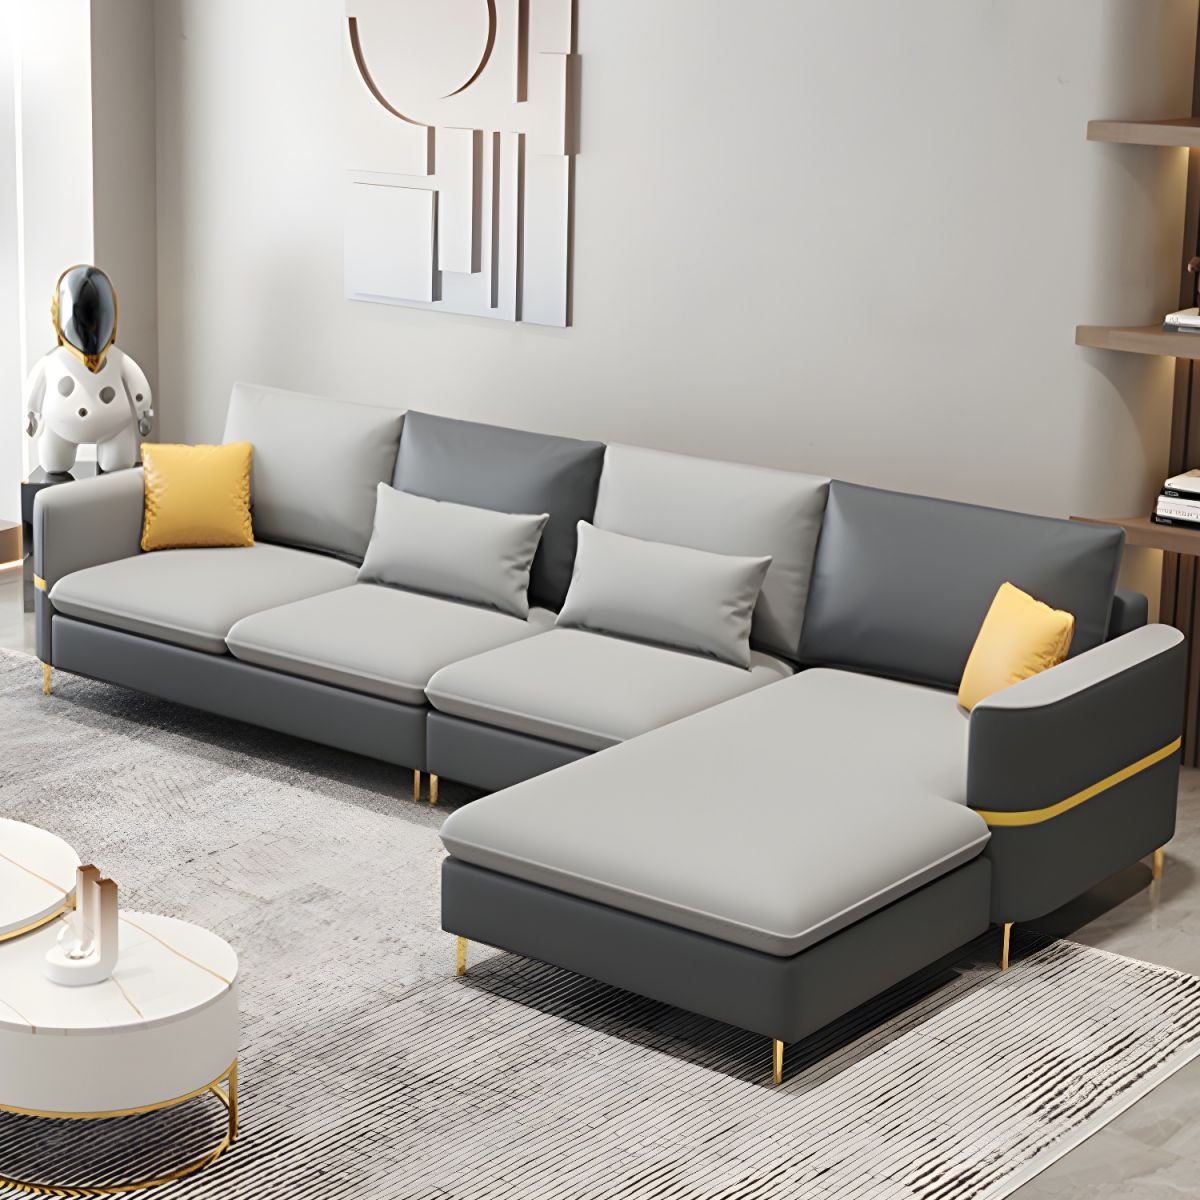 Glamorous Tech Cloth L-Shape Sectional Sofa with Square Arm and Pillow Back in 3 Piece Set - Dark/ Light Grey Tech Cloth Latex & Down Right